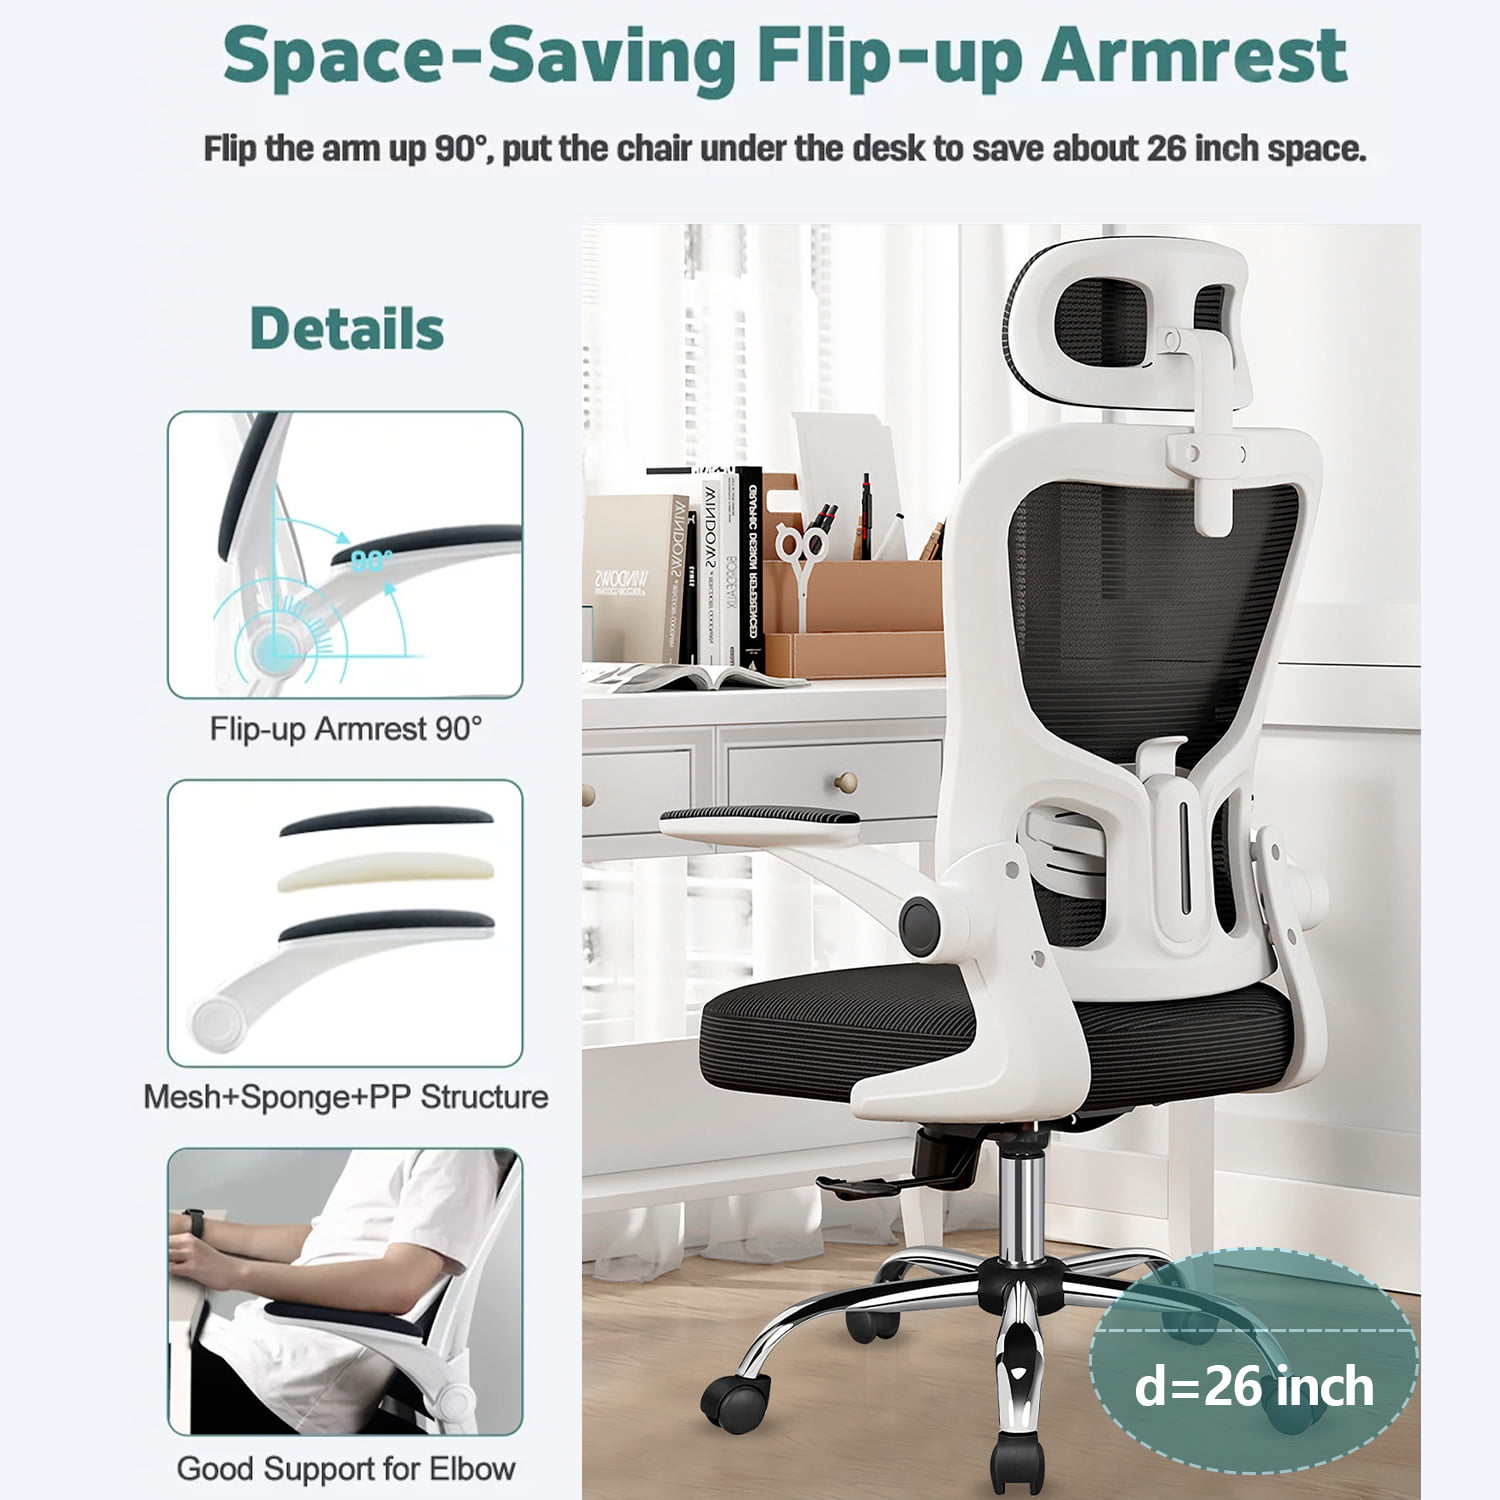 Blarity Office Chair, High Back Ergonomic Desk Chair with Adjustable Lumbar  Support and Headrest